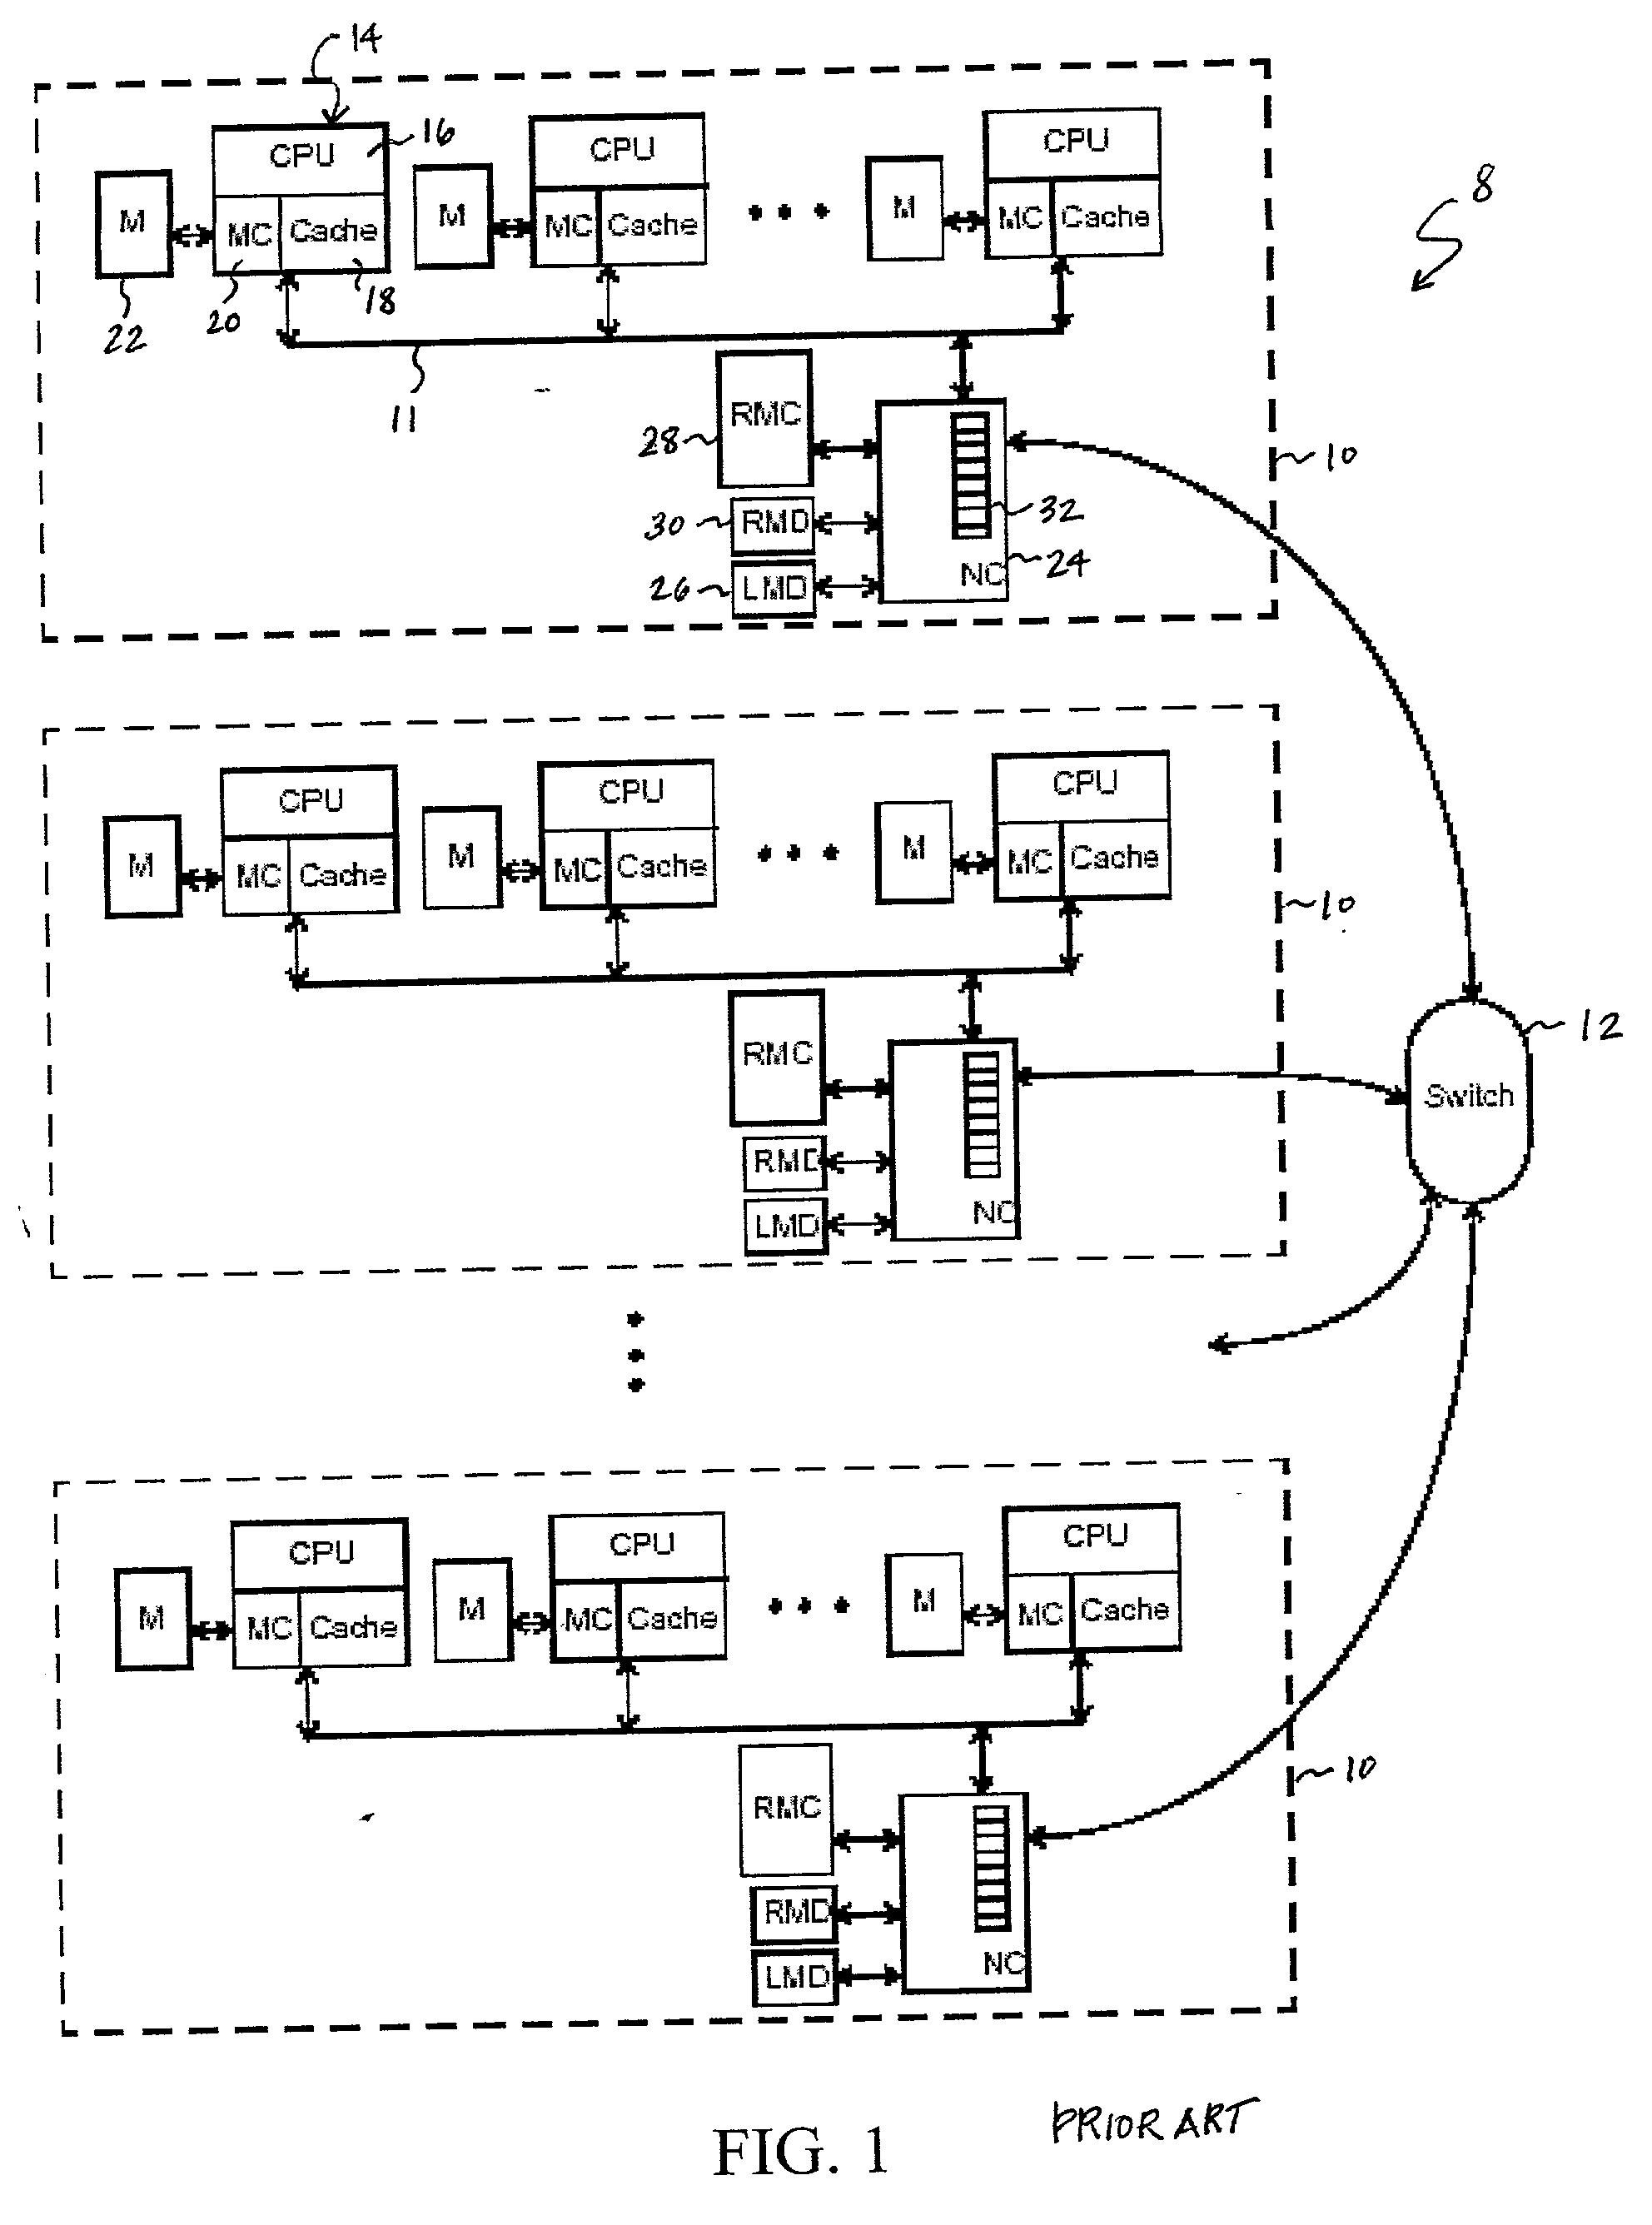 Dynamic history based mechanism for the granting of exclusive data ownership in a non-uniform memory access (numa) computer system